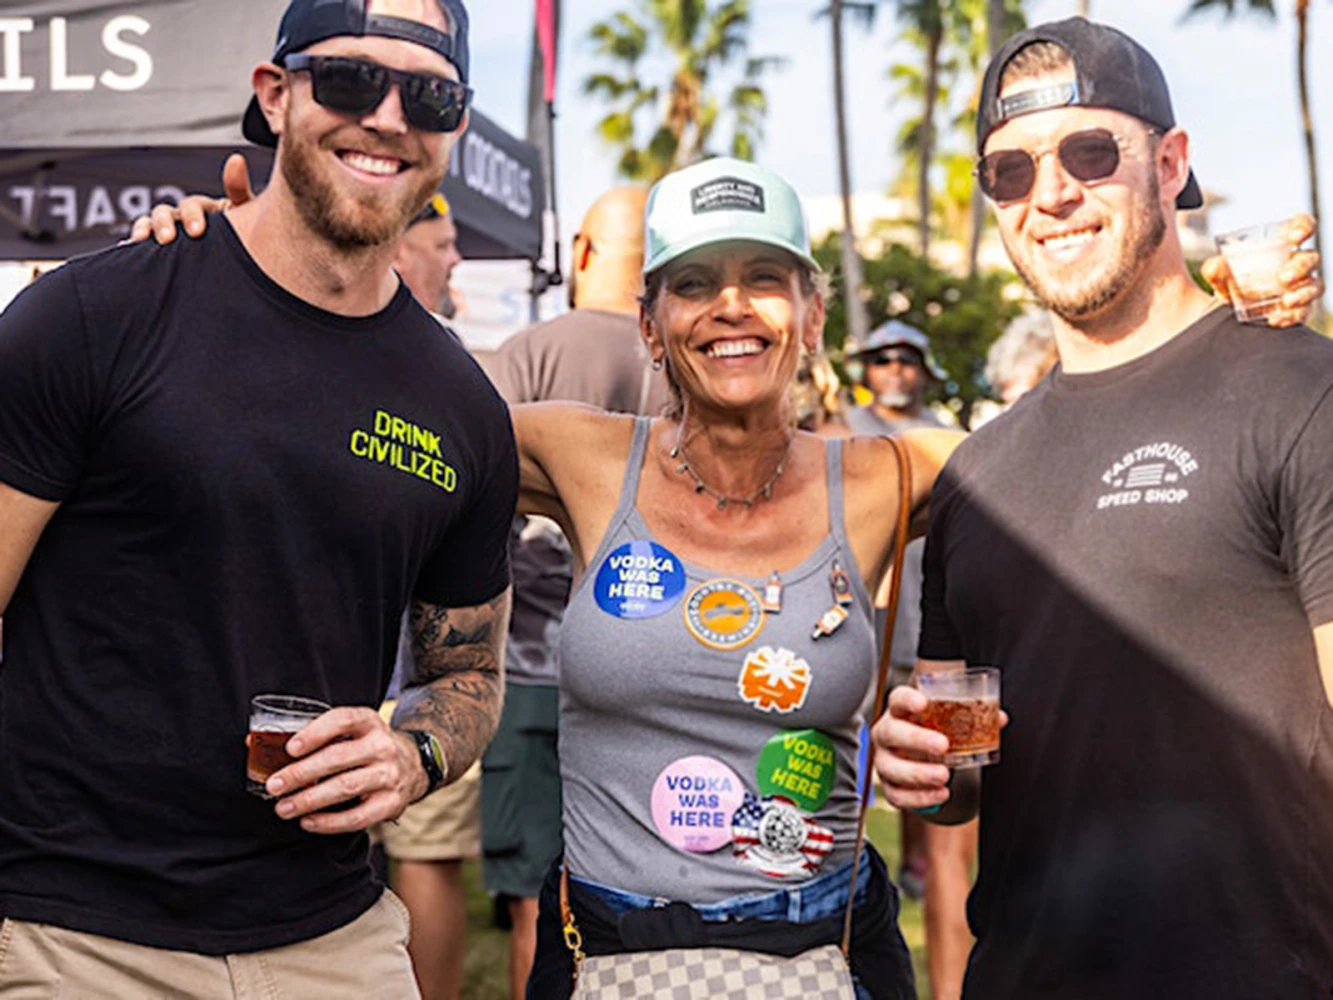 Fort Lauderdale Beer Wine and Spirits Fest: What to expect - 2